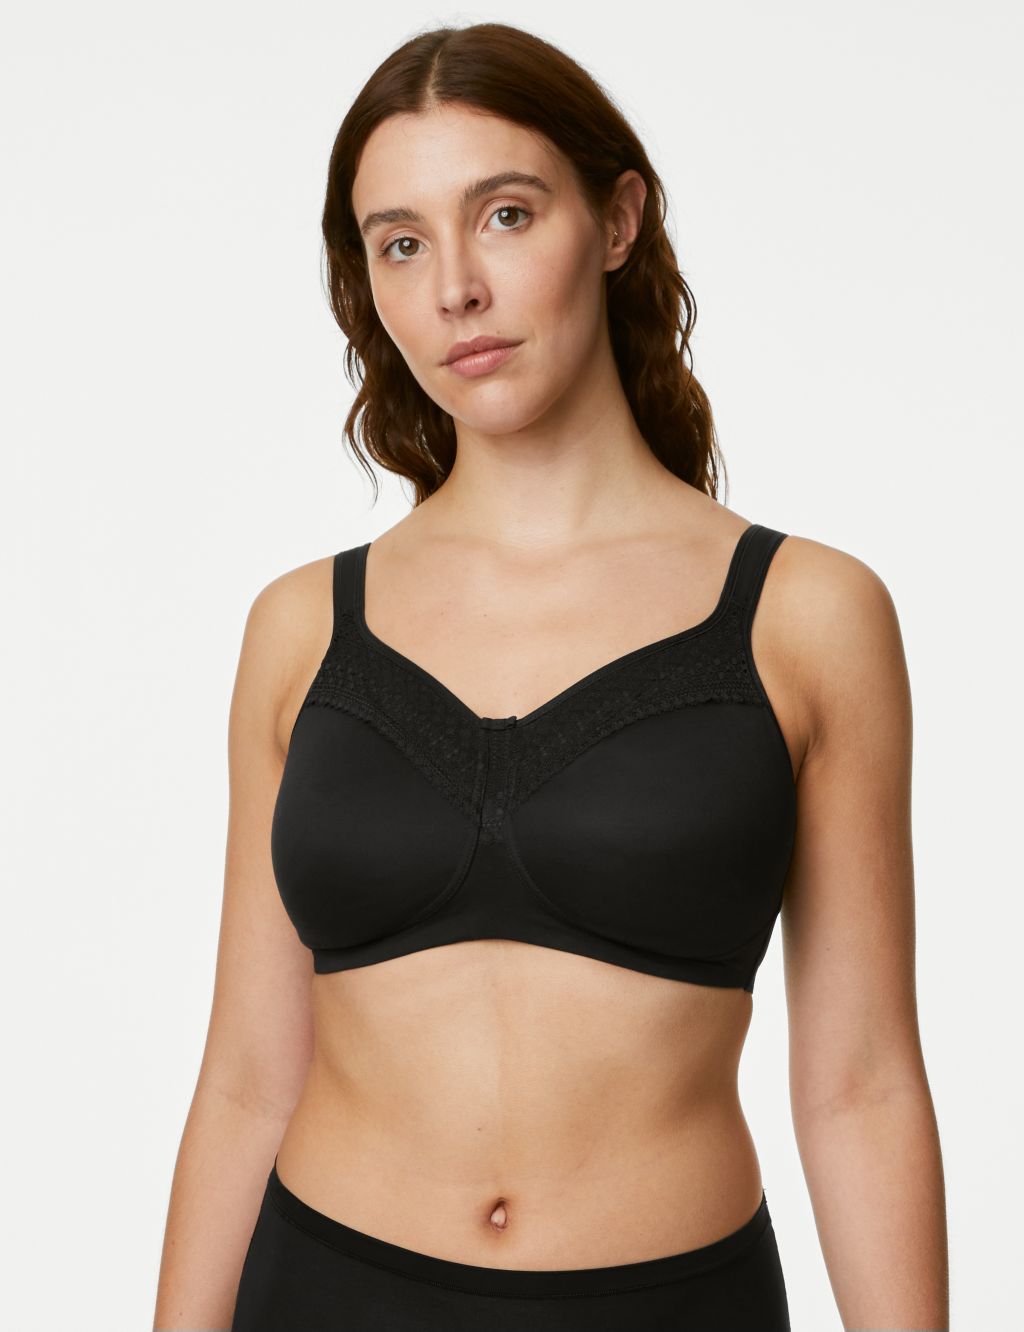 catch-L Women's Non-Wired Full Cup Sports Bra, Pack of 2, Lace